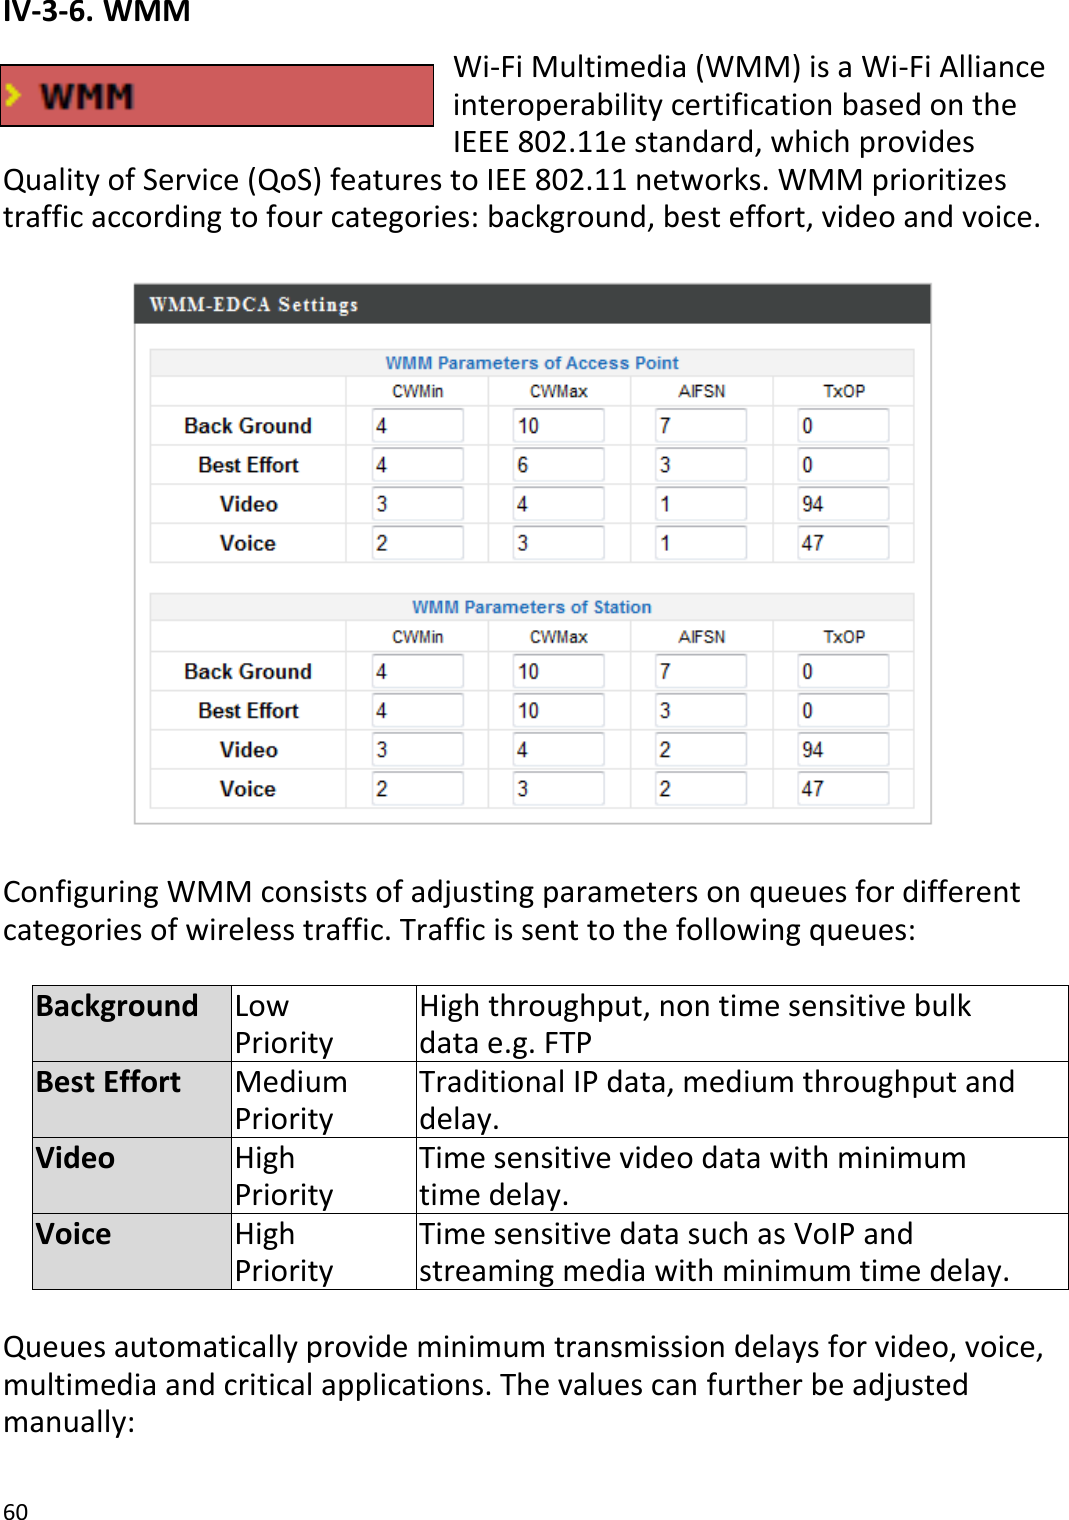 60  IV-3-6. WMM Wi-Fi Multimedia (WMM) is a Wi-Fi Alliance interoperability certification based on the IEEE 802.11e standard, which provides Quality of Service (QoS) features to IEE 802.11 networks. WMM prioritizes traffic according to four categories: background, best effort, video and voice.    Configuring WMM consists of adjusting parameters on queues for different categories of wireless traffic. Traffic is sent to the following queues:  Background Low Priority High throughput, non time sensitive bulk data e.g. FTP Best Effort Medium Priority Traditional IP data, medium throughput and delay. Video High Priority Time sensitive video data with minimum time delay. Voice High Priority Time sensitive data such as VoIP and streaming media with minimum time delay.  Queues automatically provide minimum transmission delays for video, voice, multimedia and critical applications. The values can further be adjusted manually:  